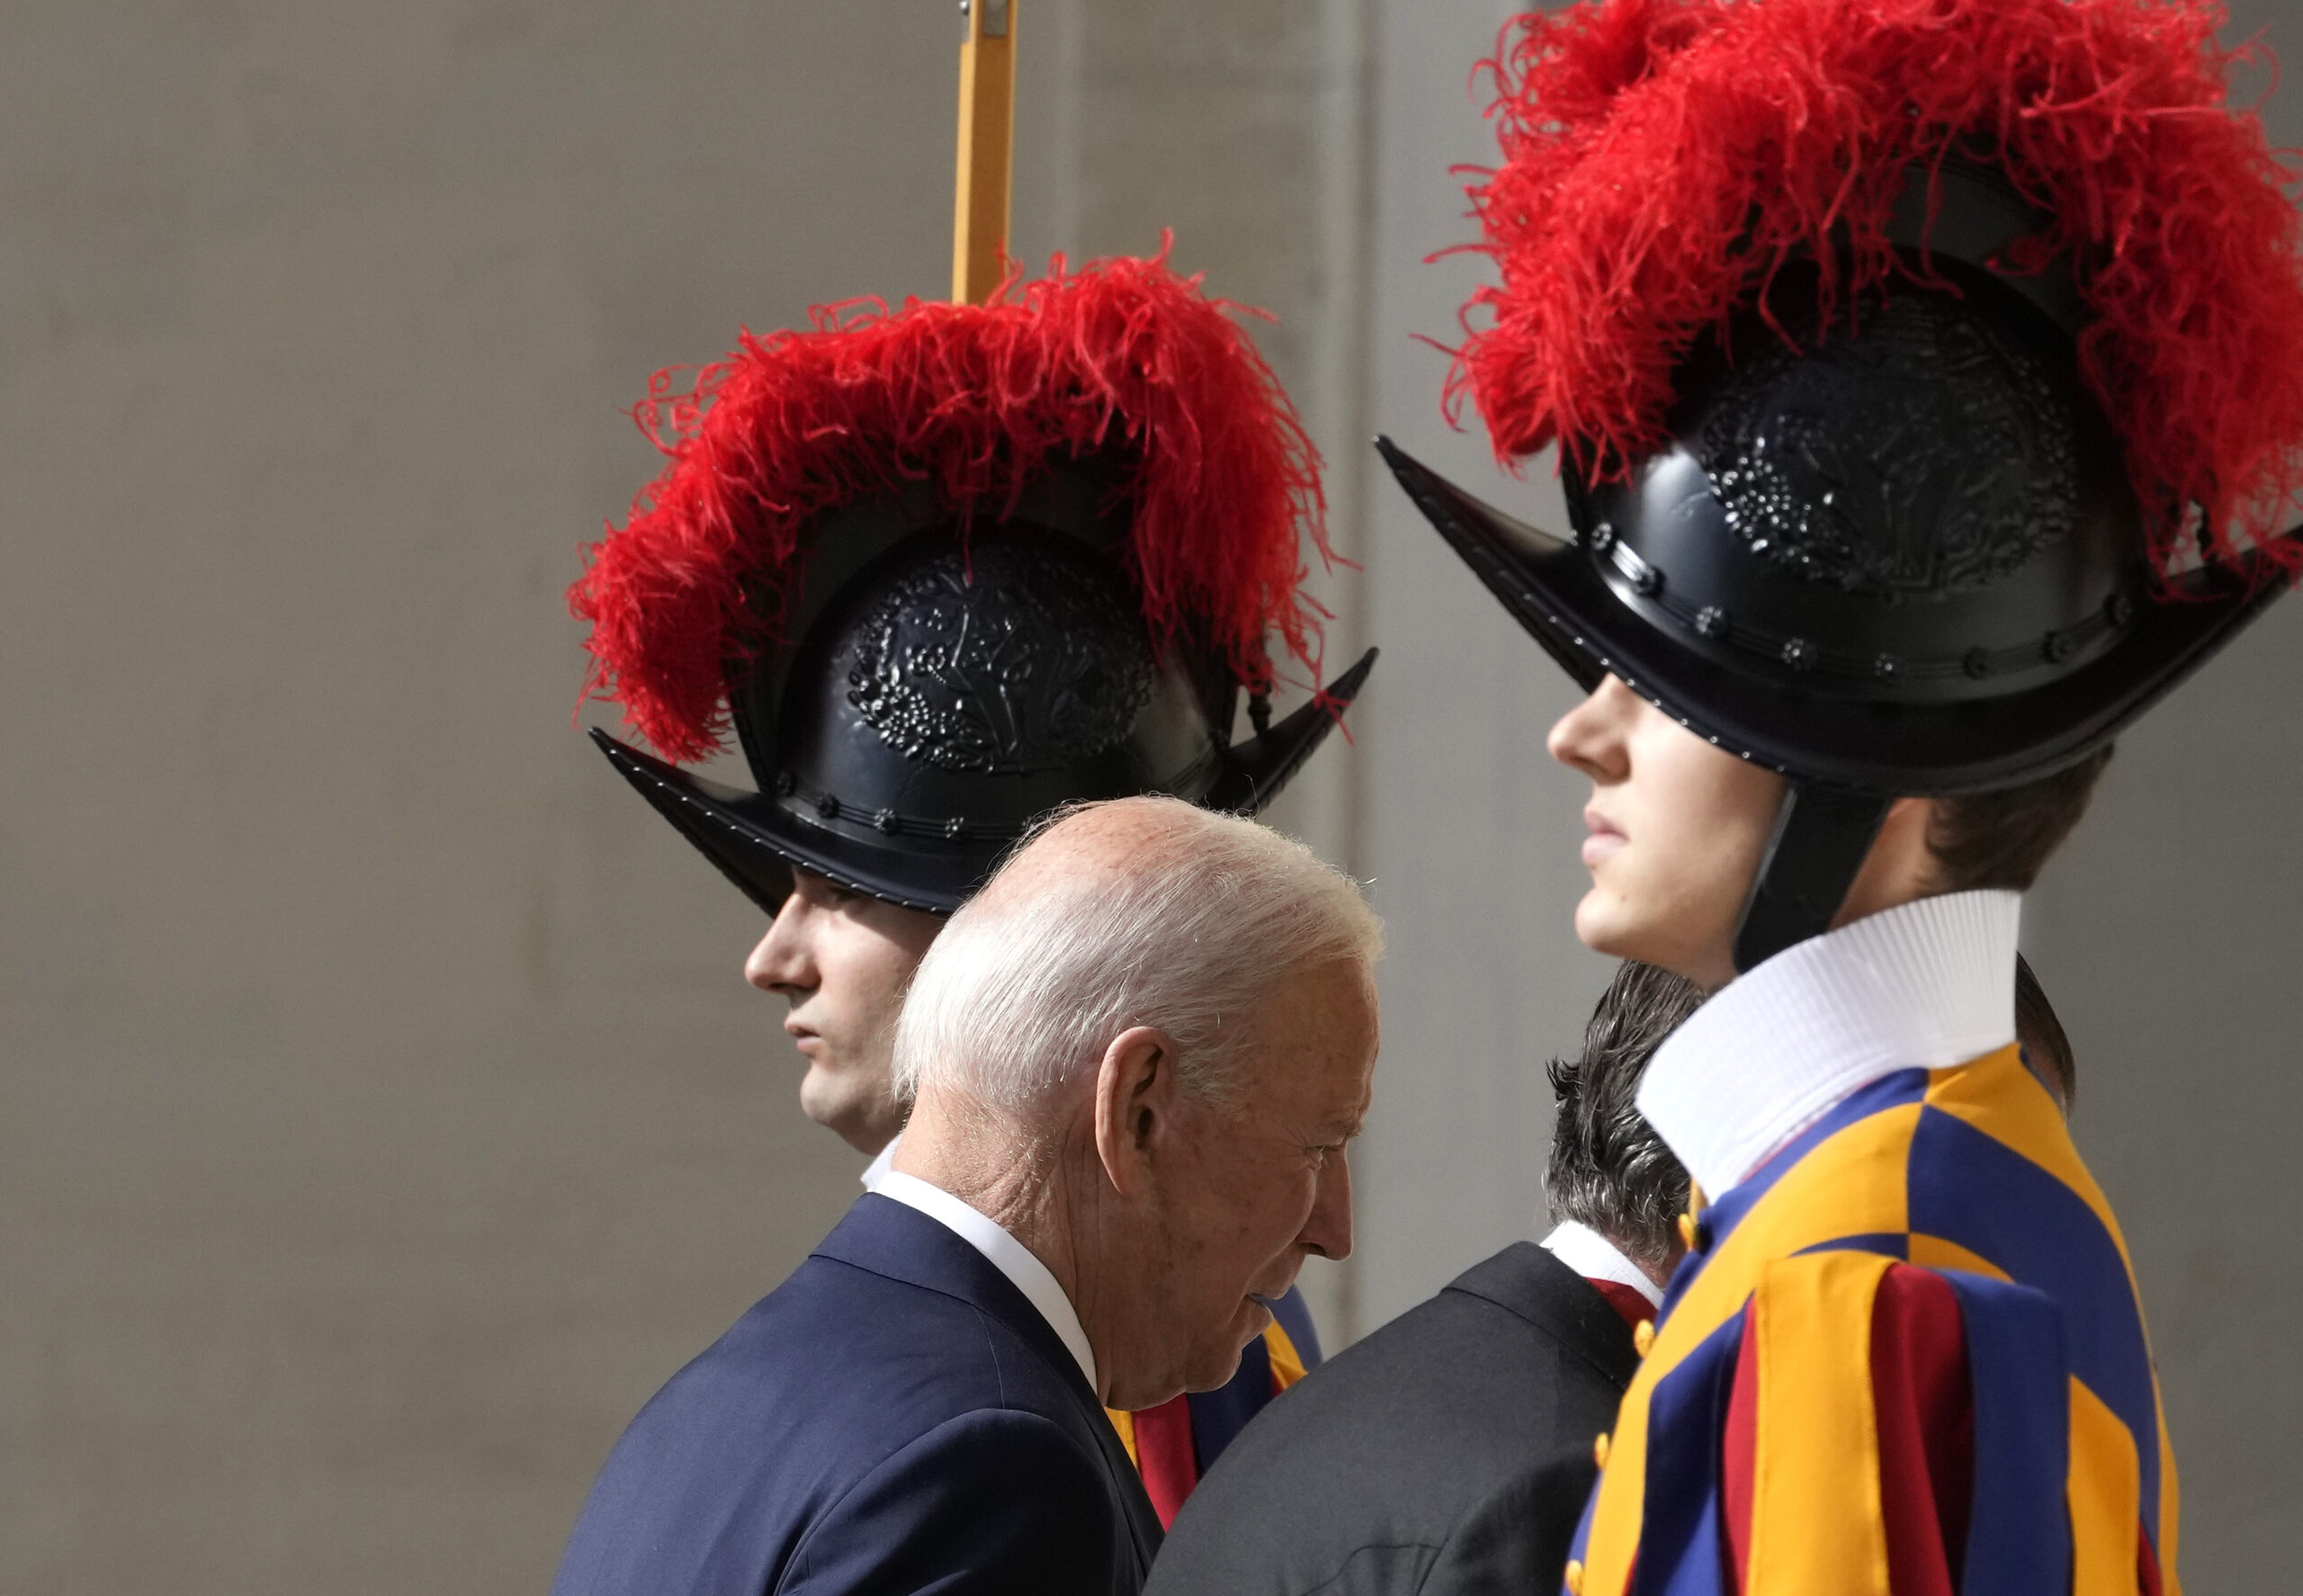 U.S. President Joe Biden walks past two Swiss Guards as he arrives for a meeting with Pope Francis at the Vatican, Friday, Oct. 29, 2021. A Group of 20 summit scheduled for this weekend in Rome is the first in-person gathering of leaders of the world's biggest economies since the COVID-19 pandemic started. (AP Photo/Andrew Medichini)